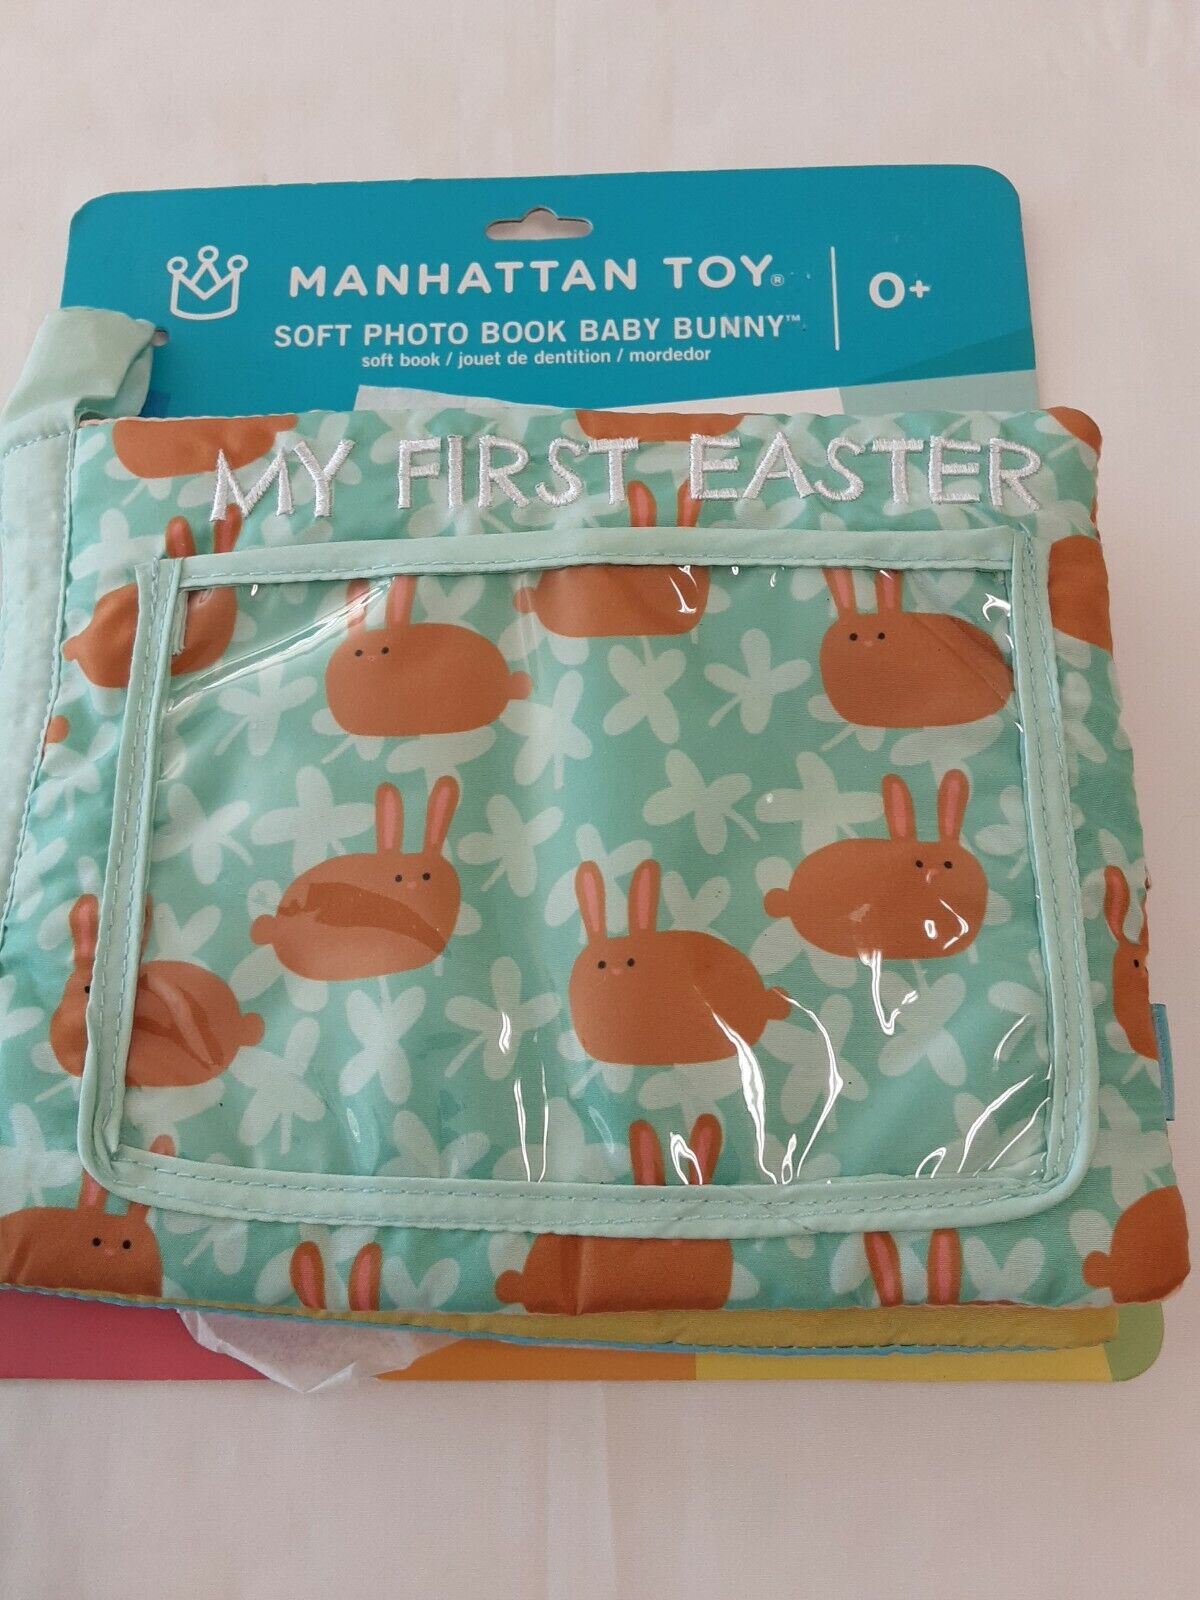 Manhattan Toy "my First Easter" Soft Photo Book Baby Bunny, Holds 5 Photos Bnwt!